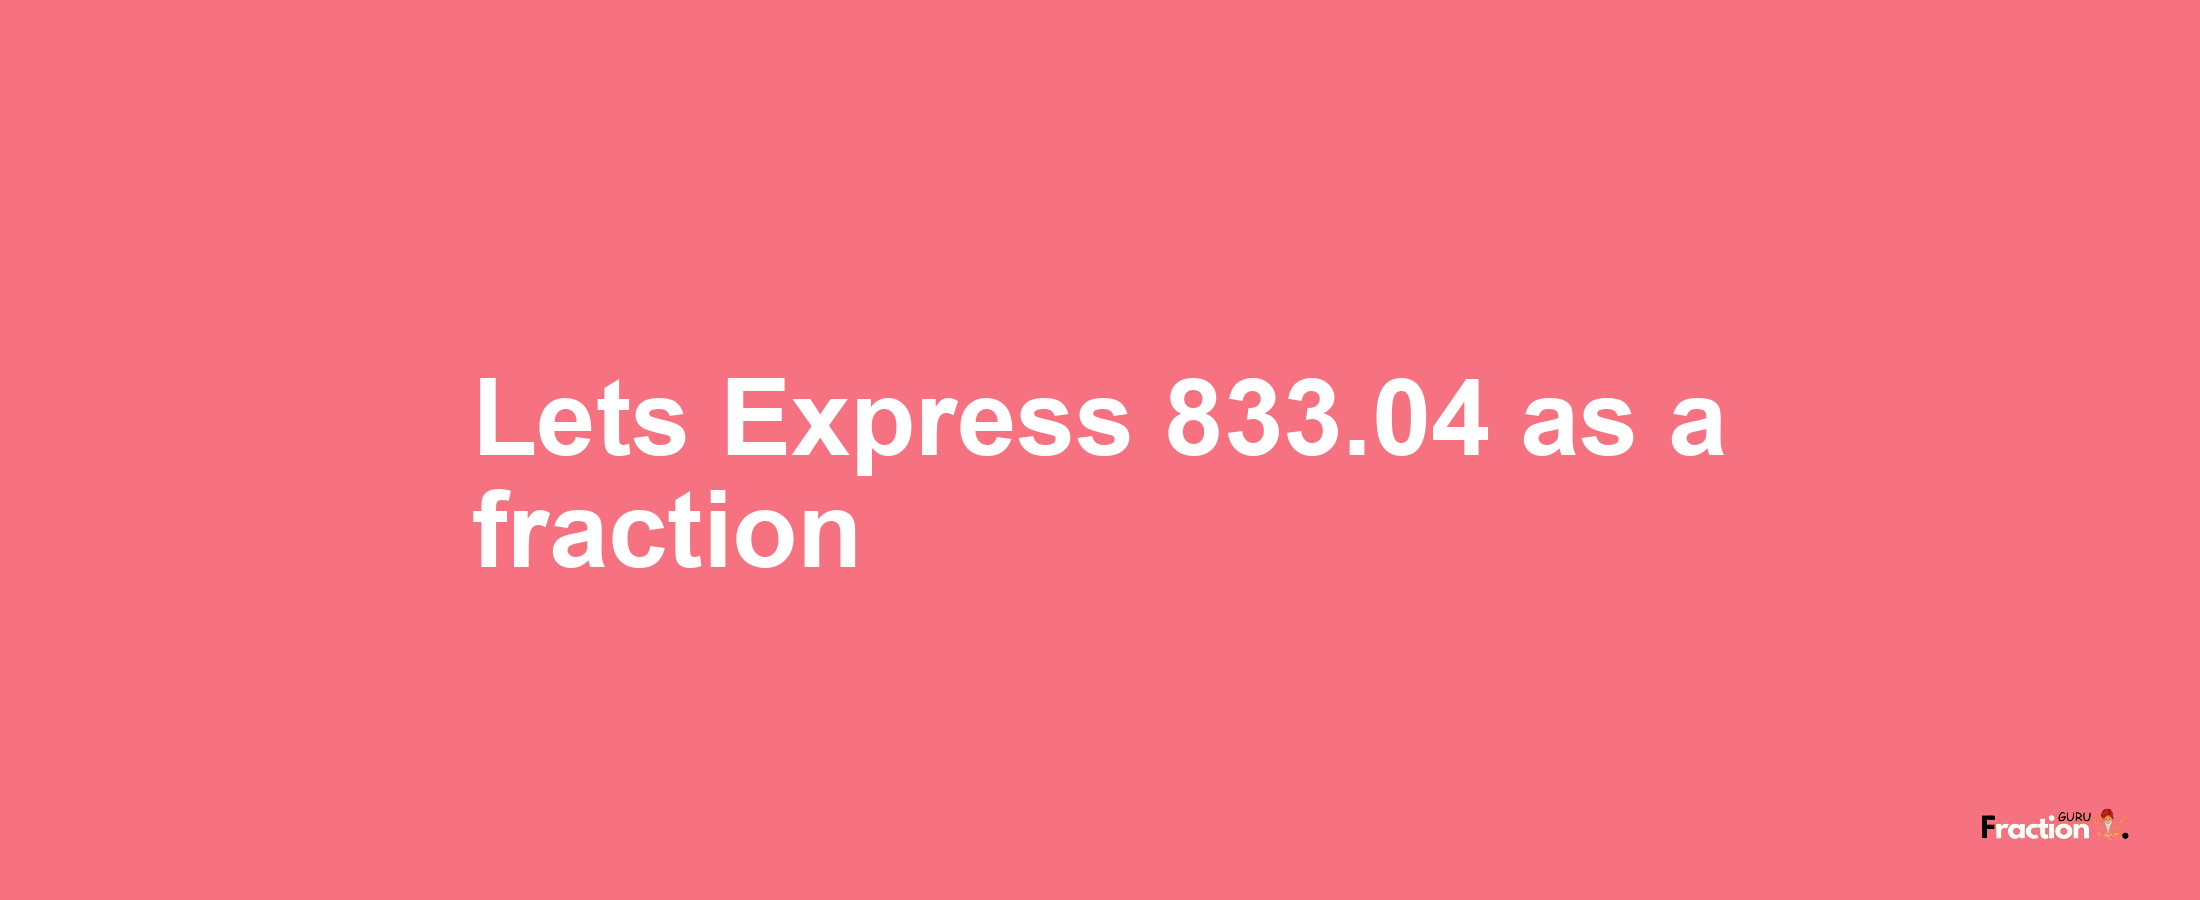 Lets Express 833.04 as afraction